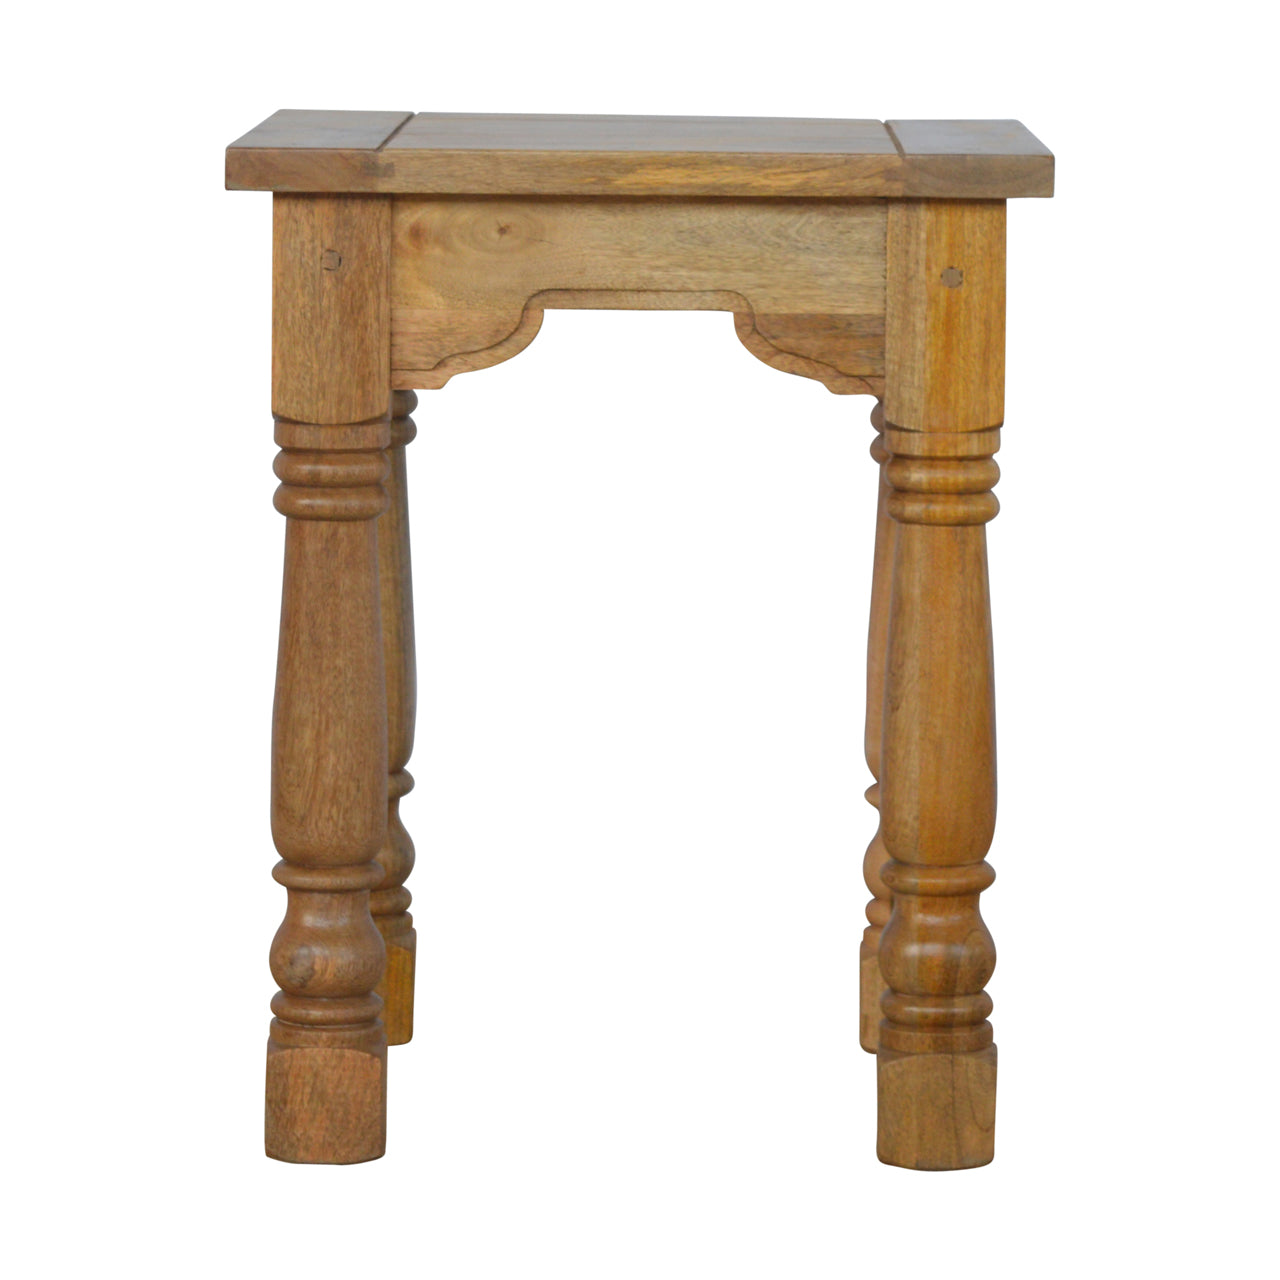 View End Table with Turned Legs information